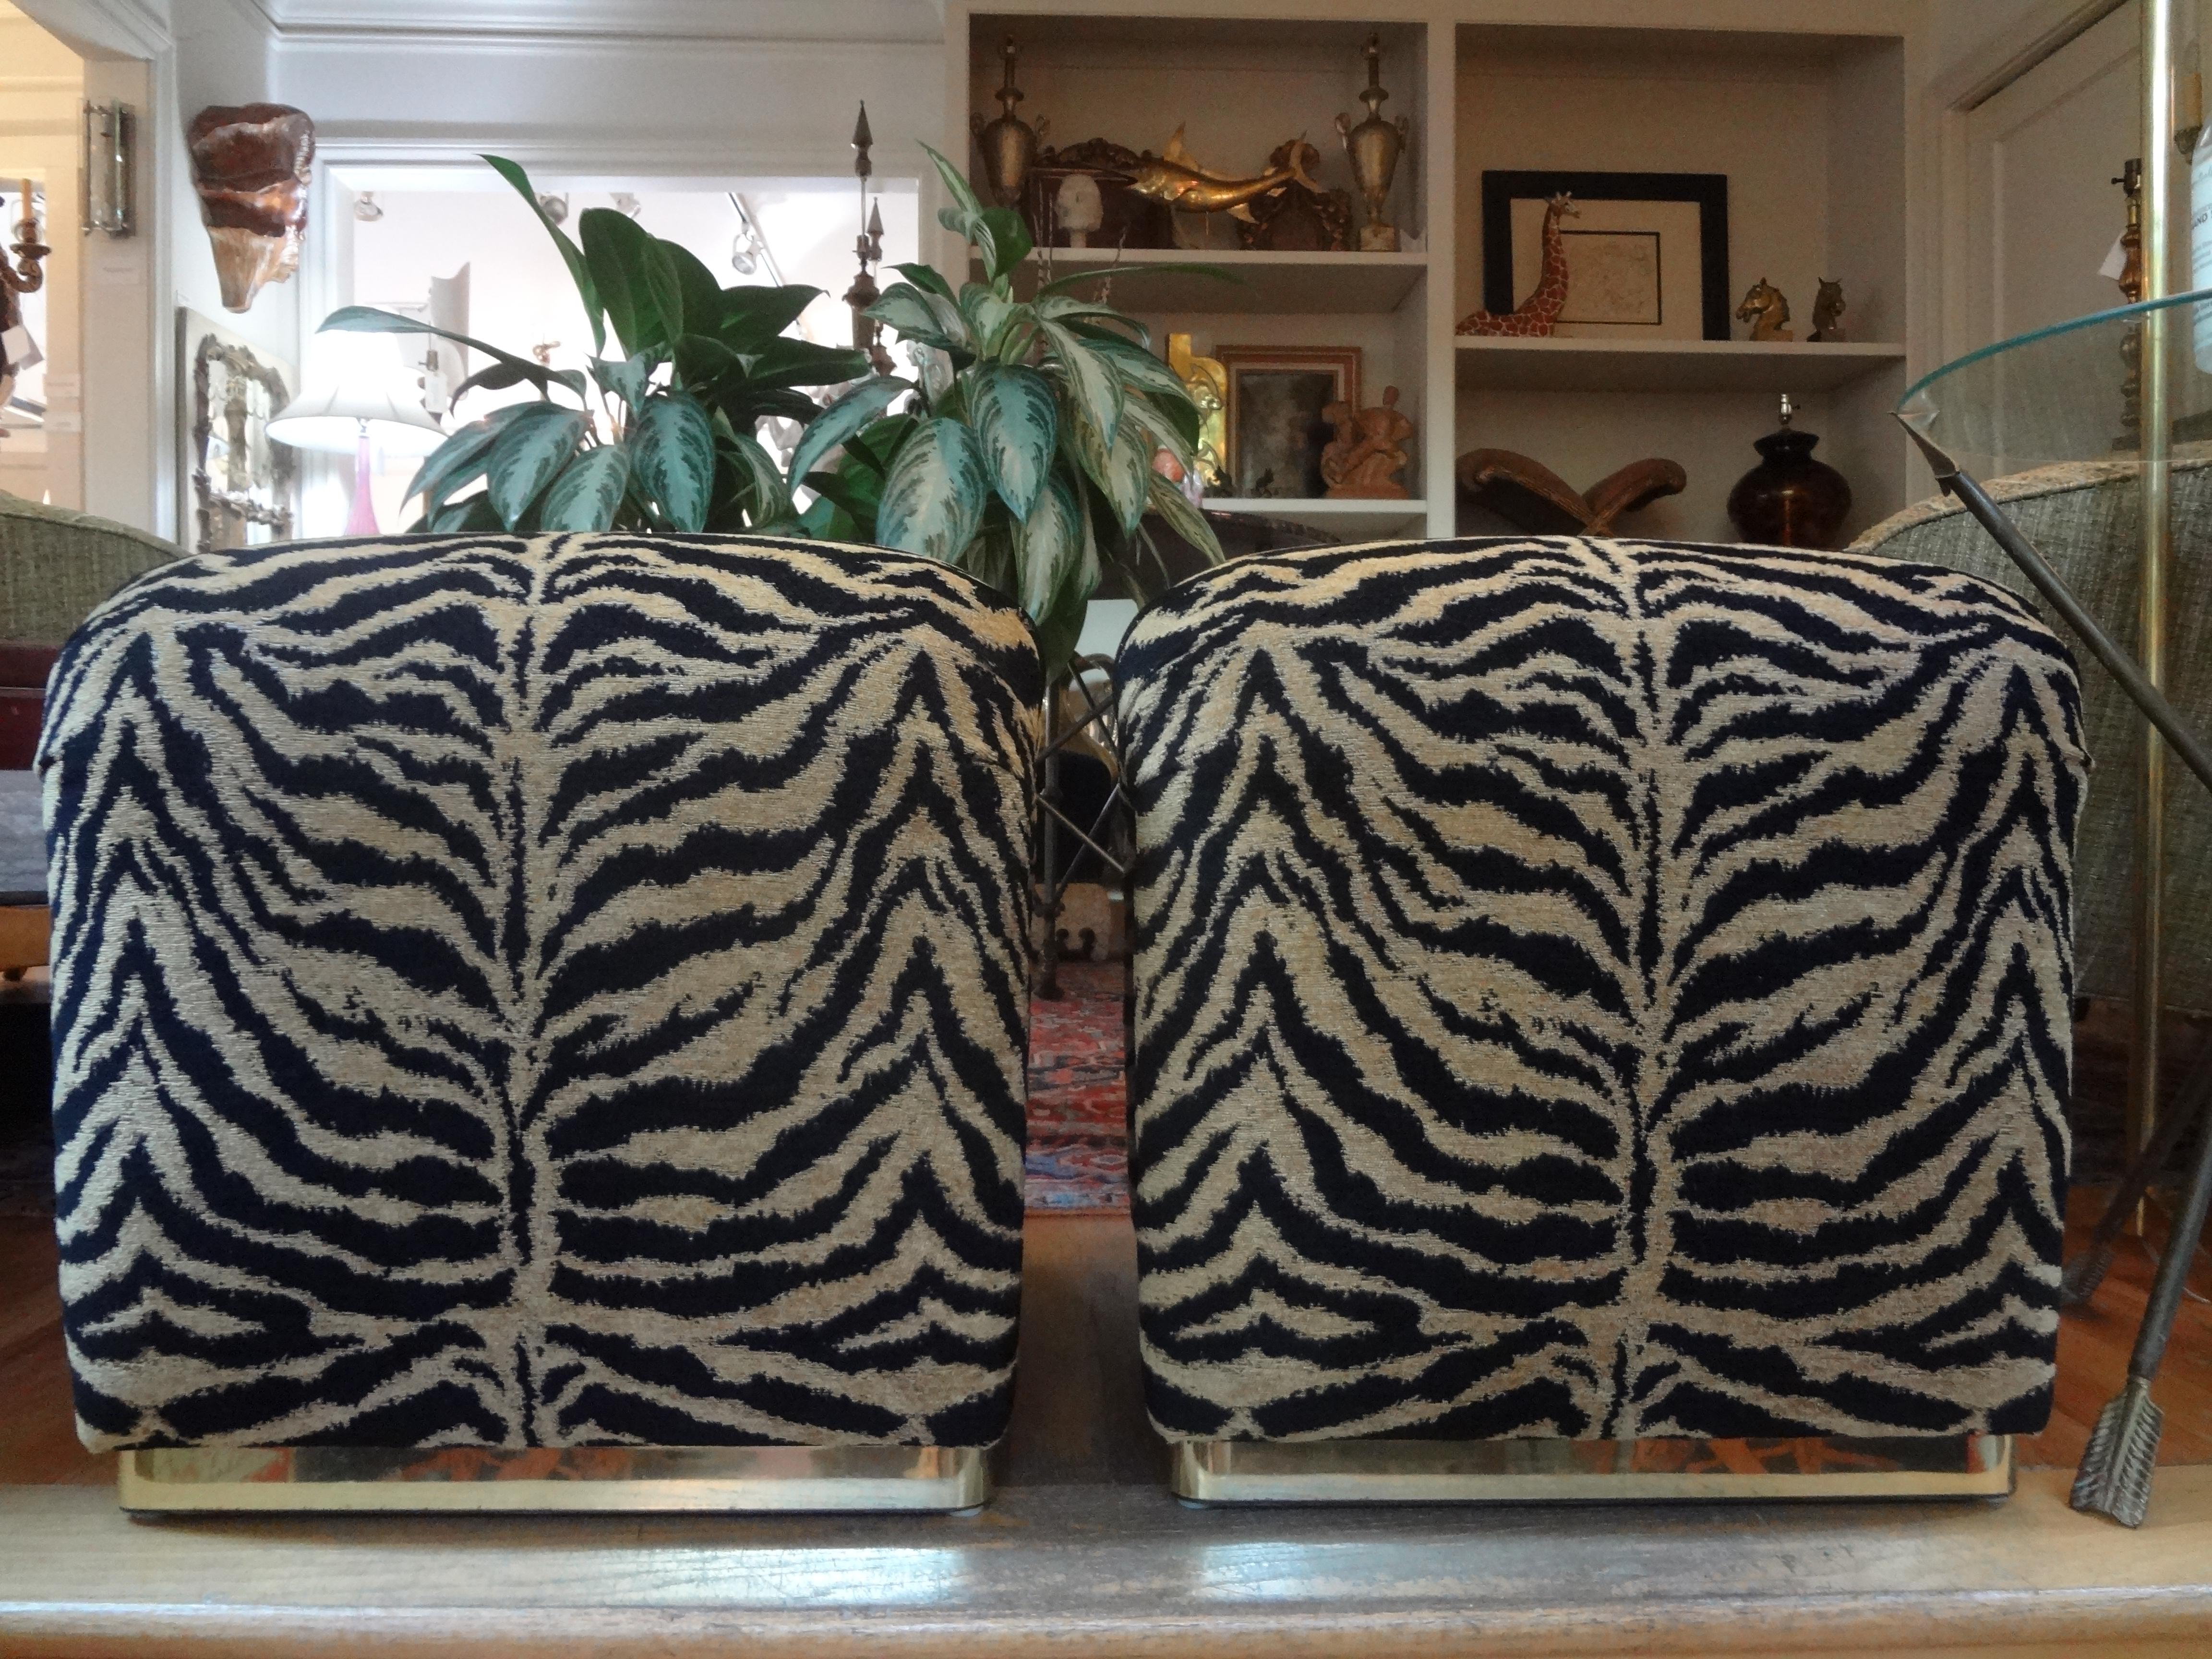 Stunning pair of Karl Springer style waterfall benches, ottomans or poofs with brass bases. These beautiful Hollywood Regency benches have been professionally upholstered in black and gold tiger print chenille. These mid-century stools are very